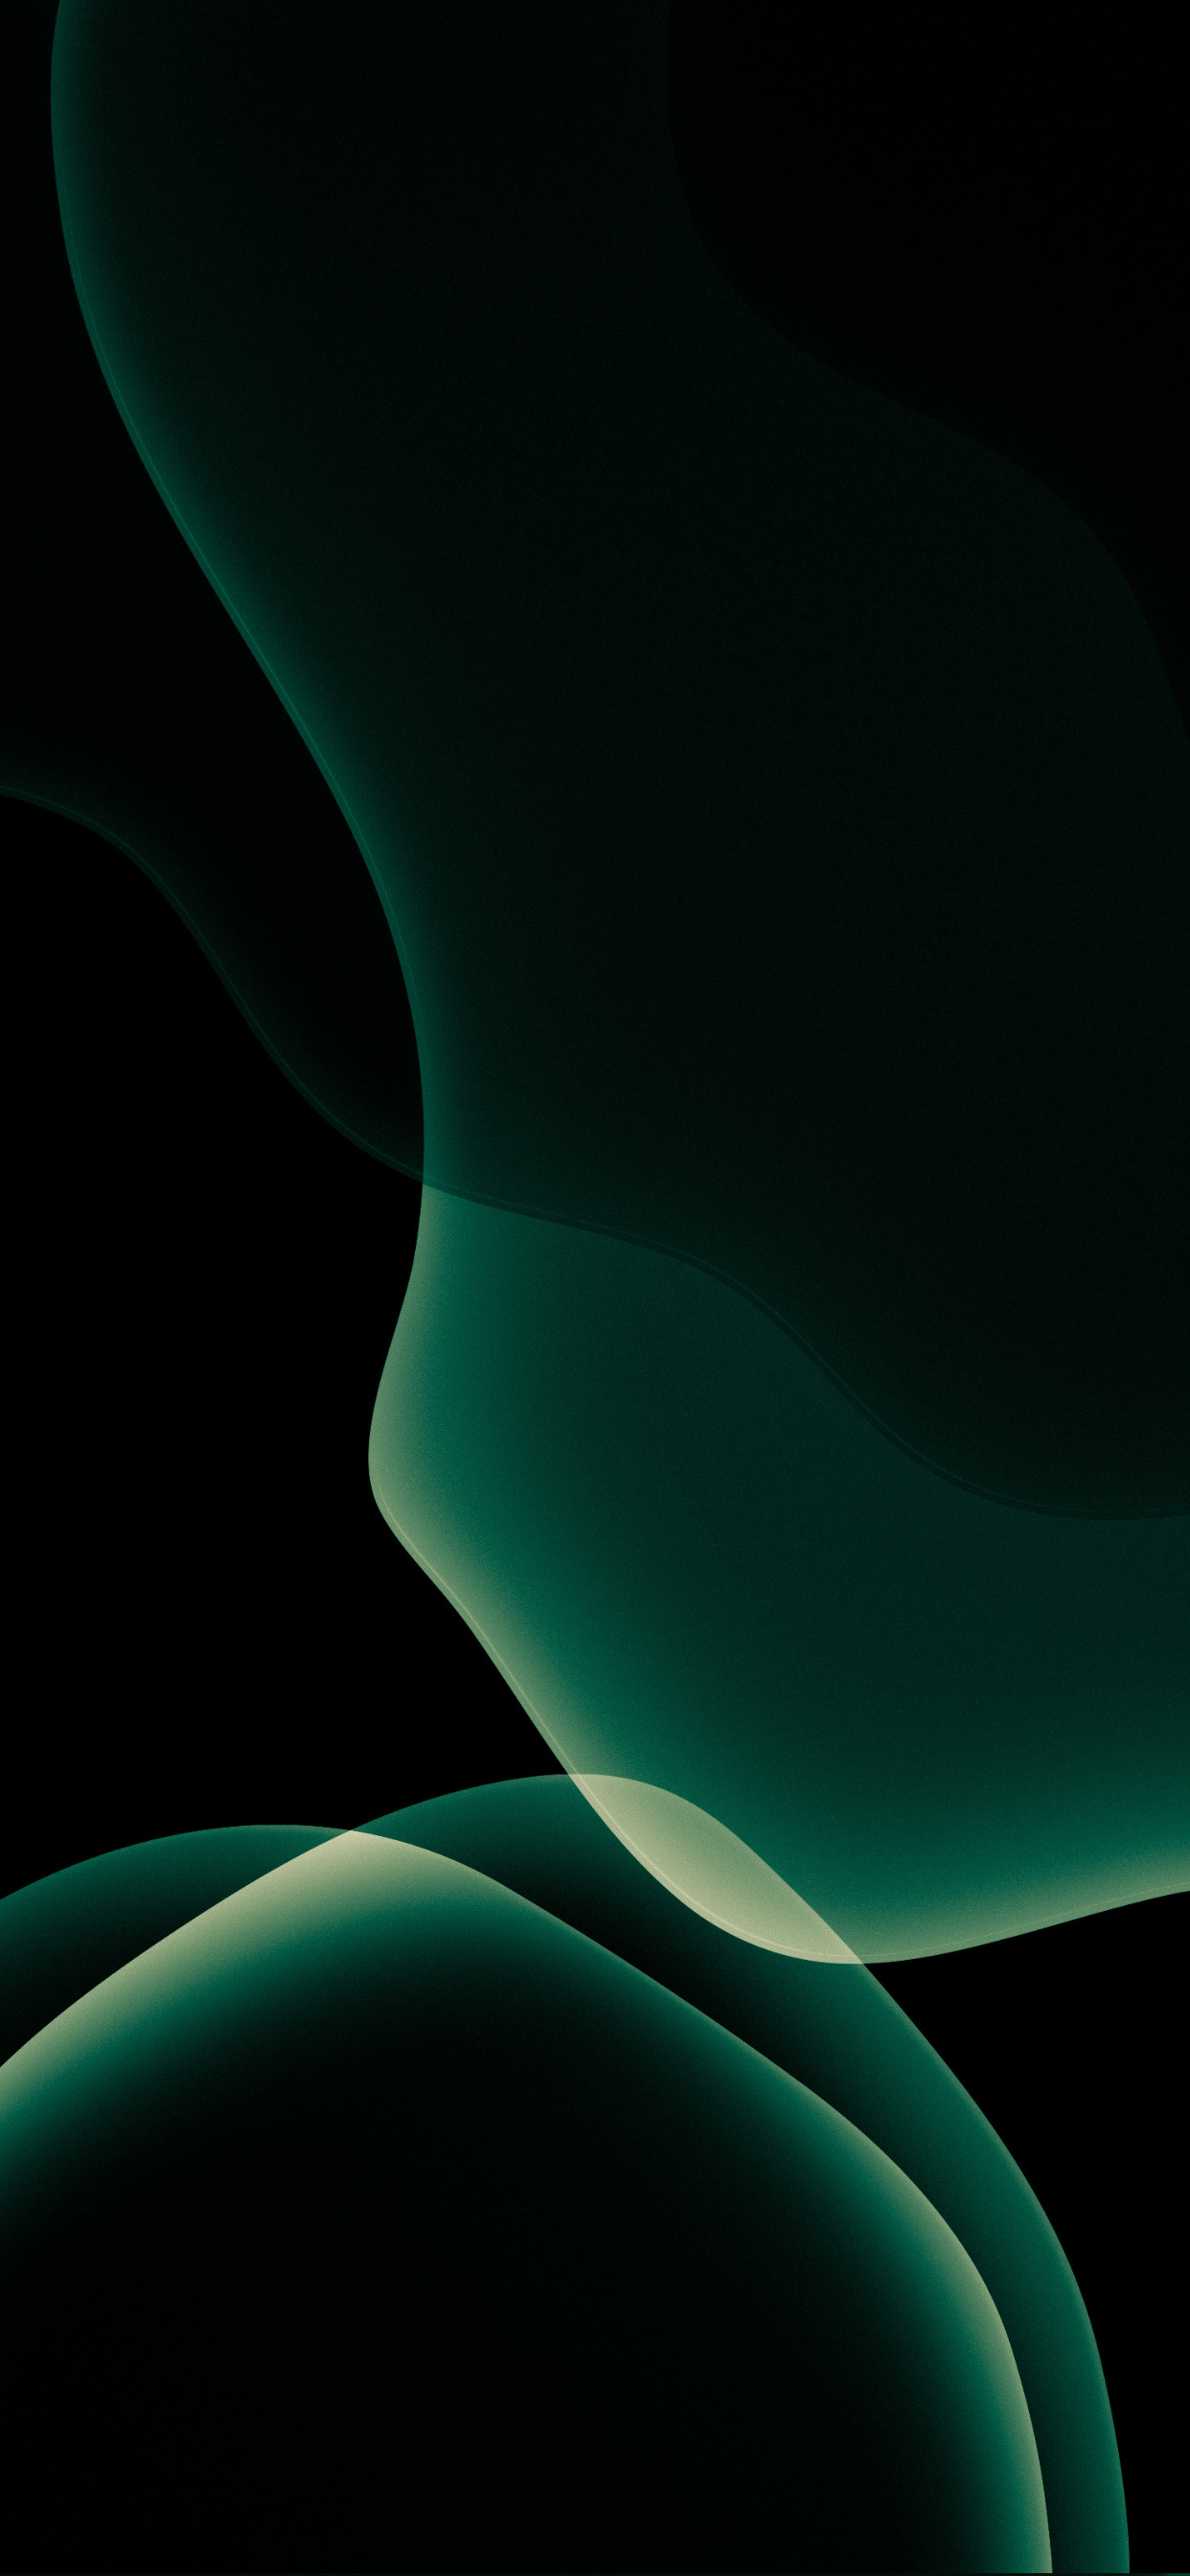 Free download Midnight Green wallpaper [1242x2688] for your Desktop, Mobile & Tablet. Explore iPhone 13 Pro Wallpaper. MacBook Pro 13 Wallpaper, MacBook Pro 13 Wallpaper Size, Wallpaper For Macbook Pro 13 Inch